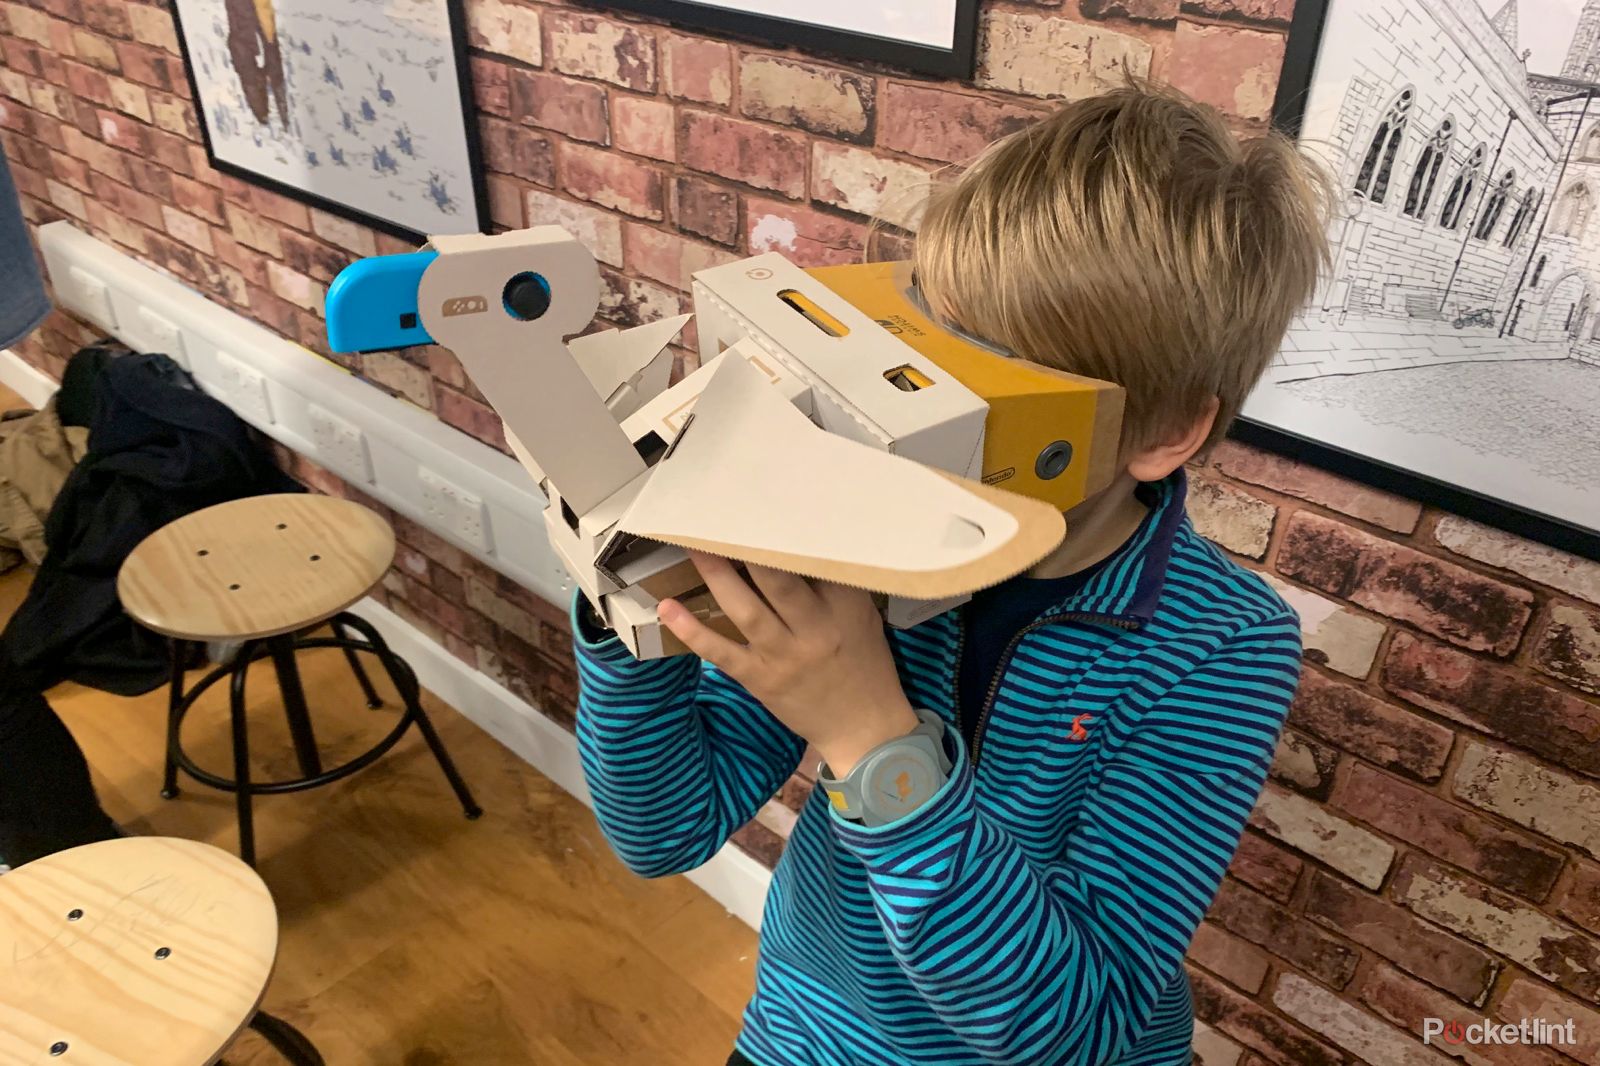 Nintendo Labo VR review An Immersive fun way to try out VR image 2